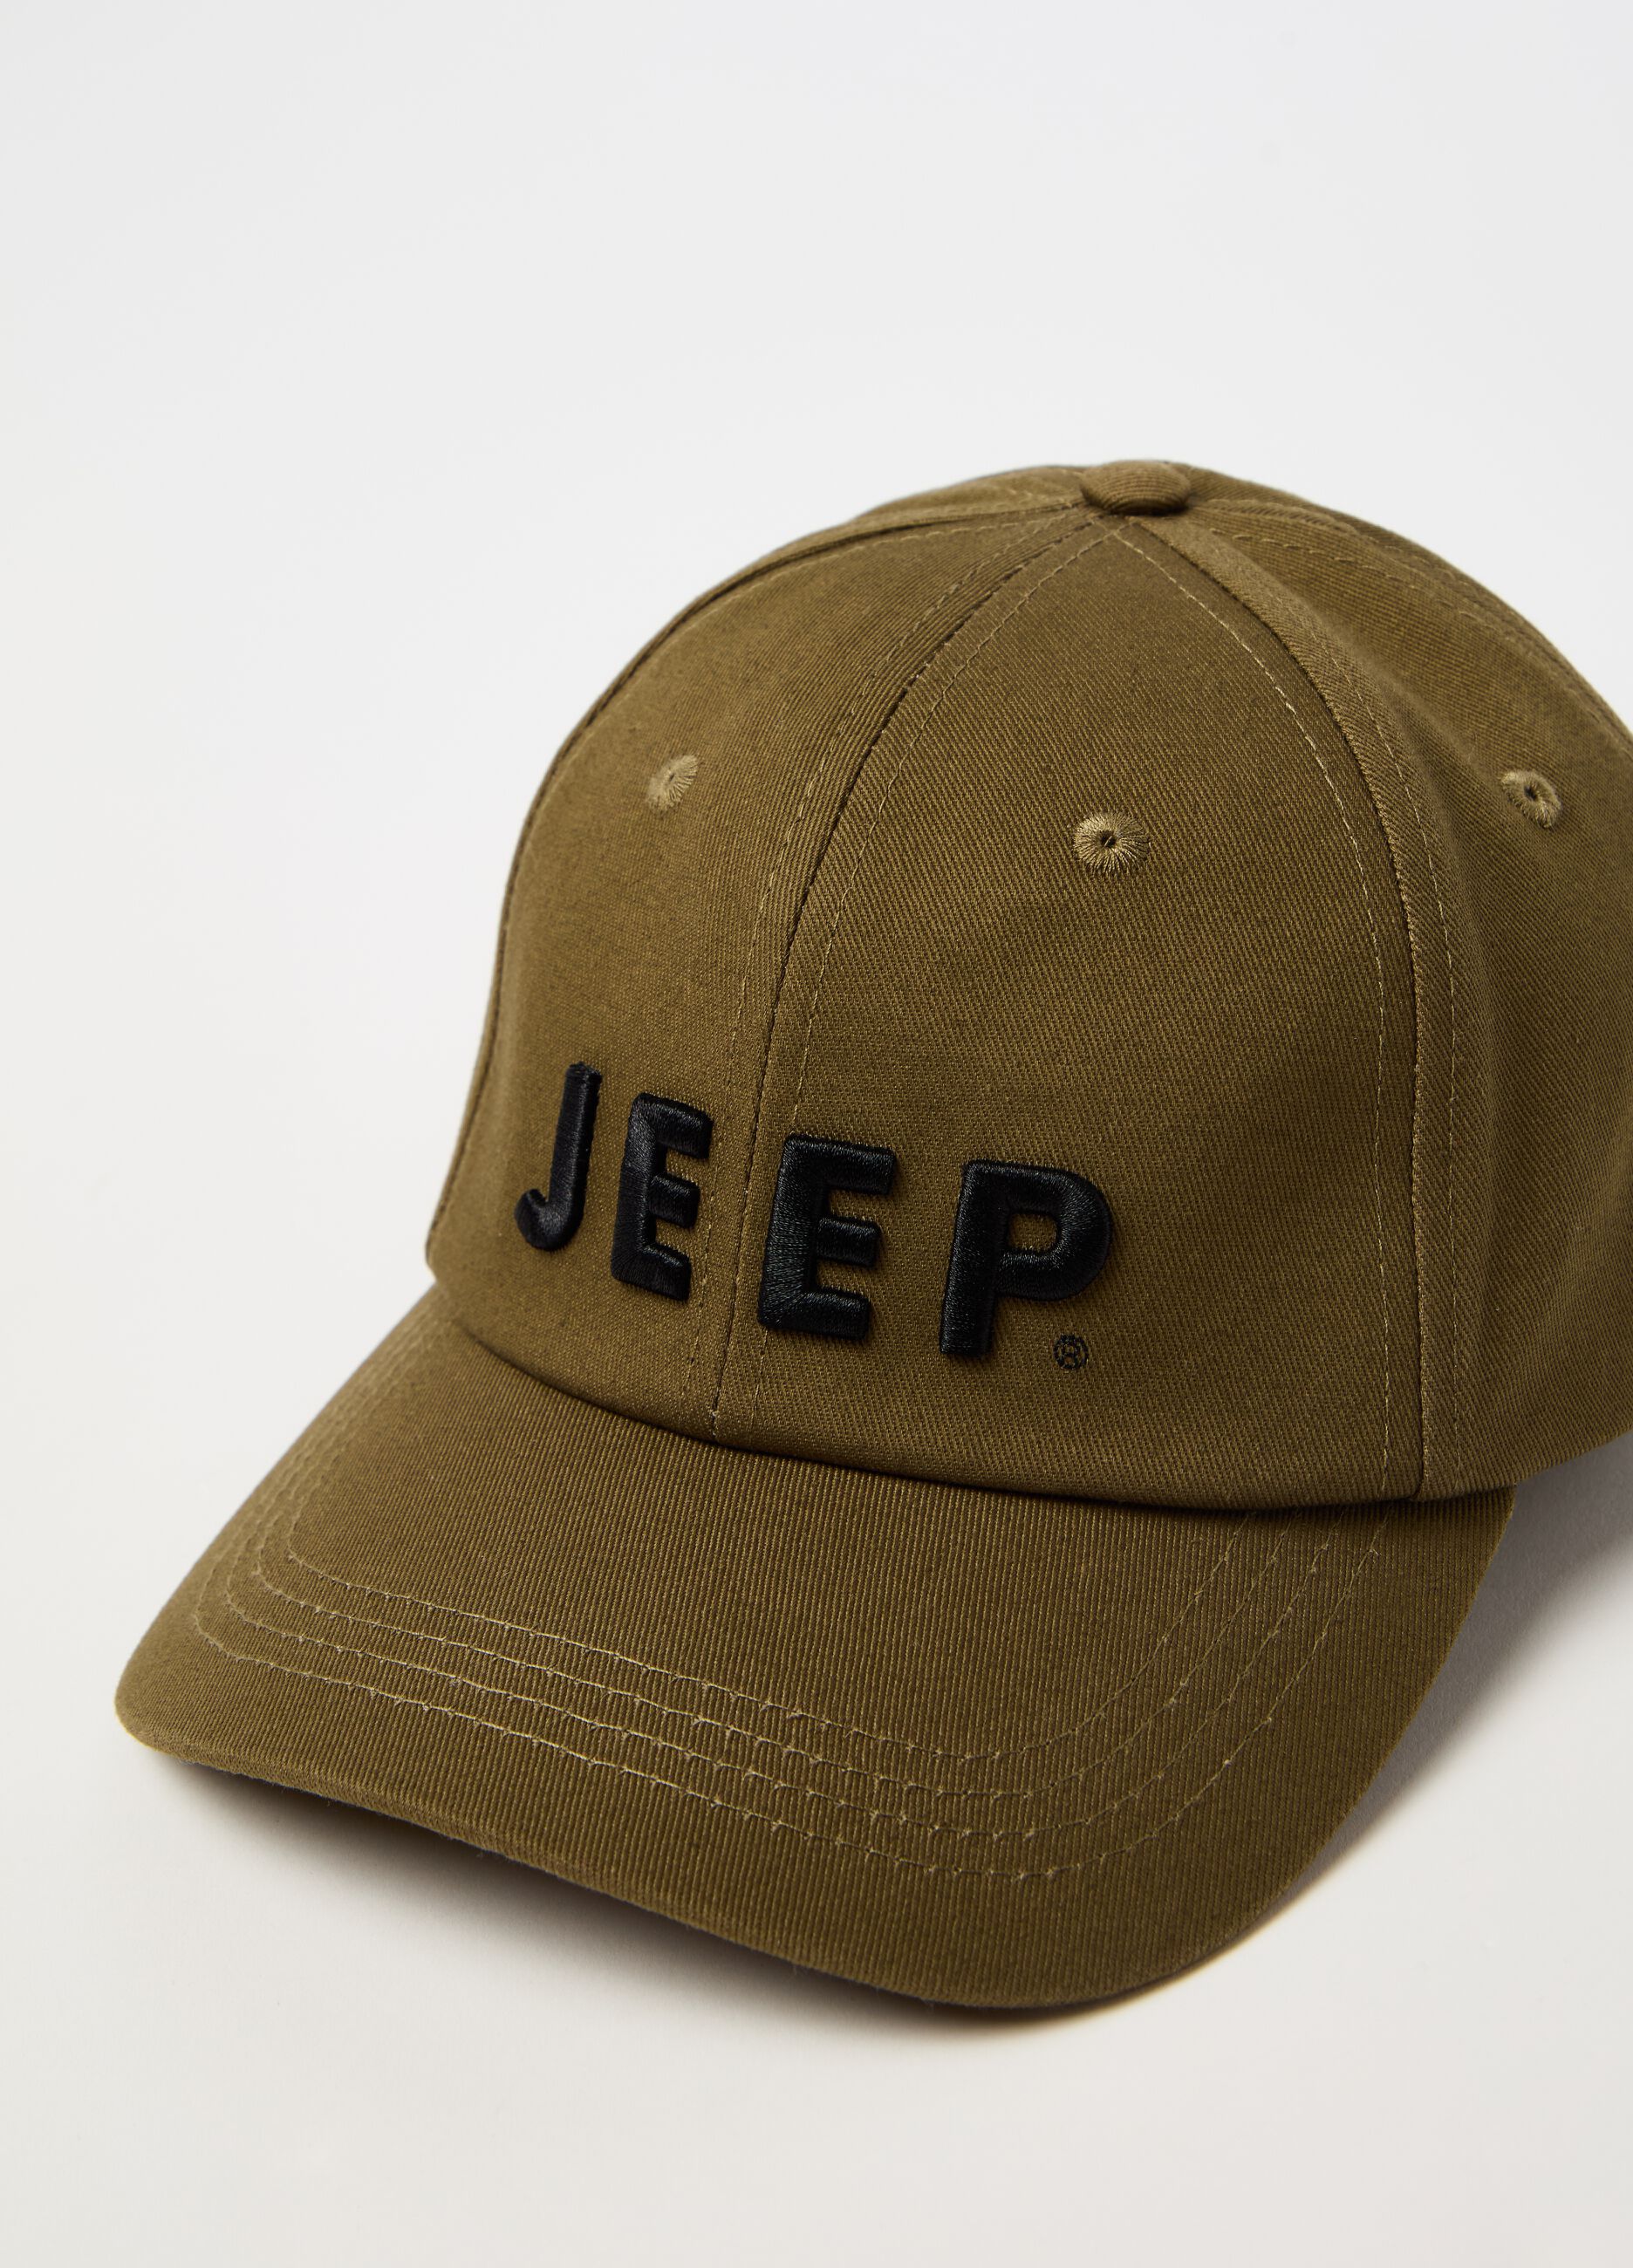 Baseball cap with Jeep embroidery